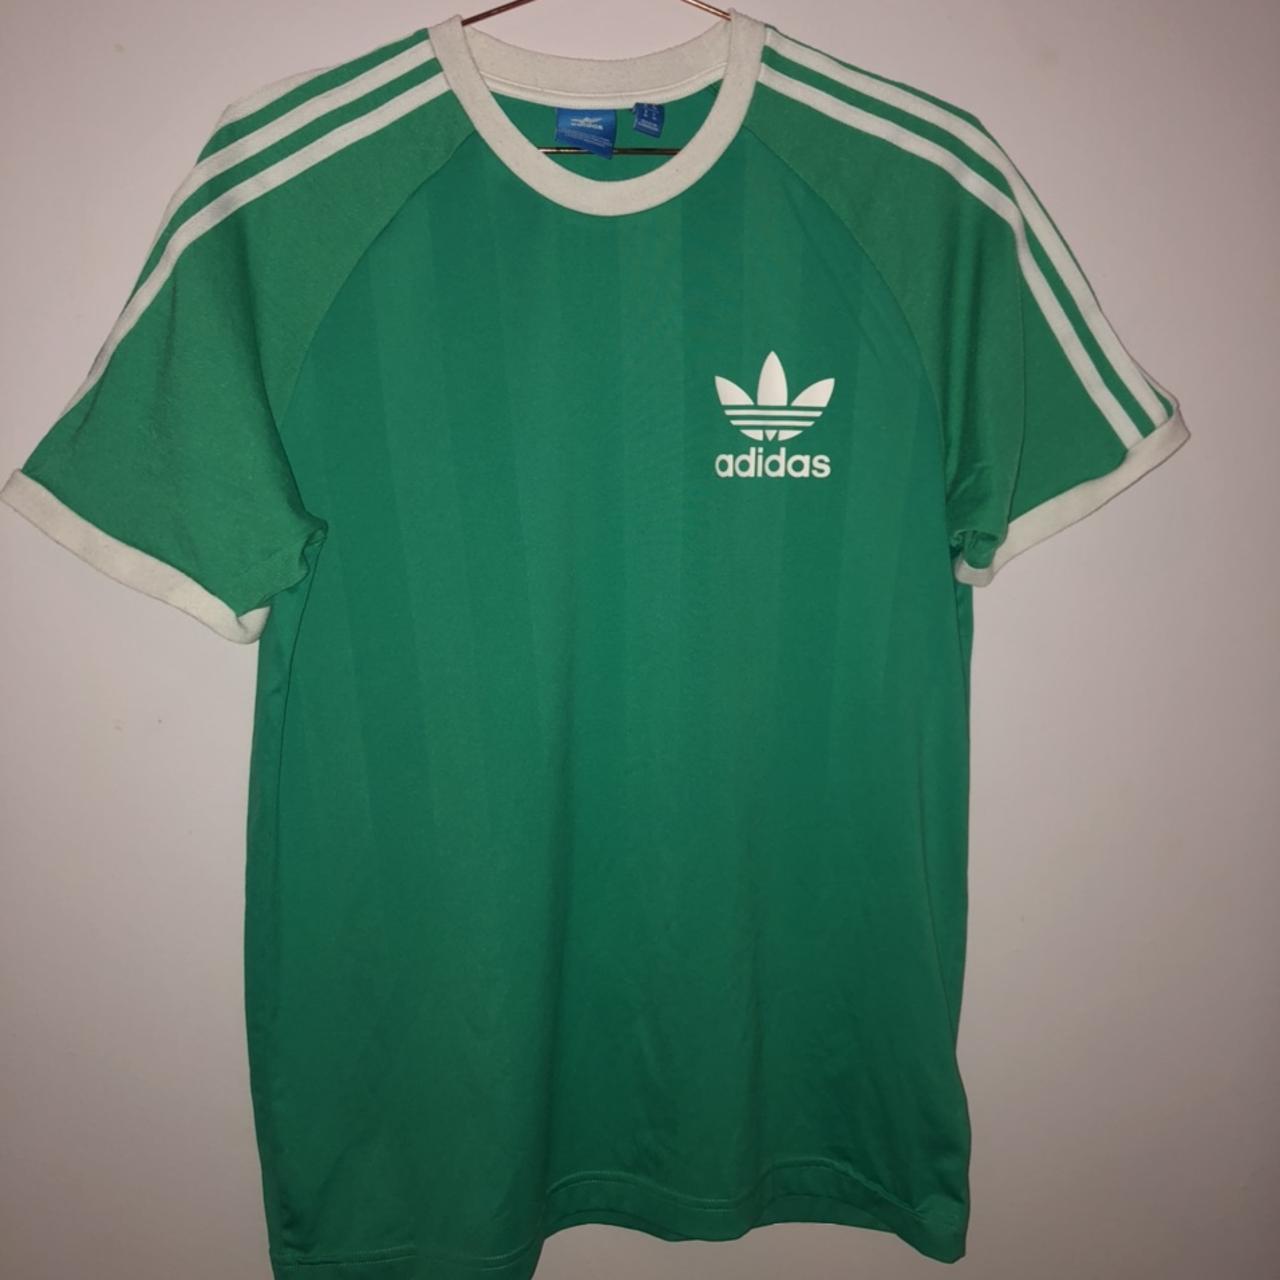 Green Adidas T-shirt with white stripes and logo//... - Depop